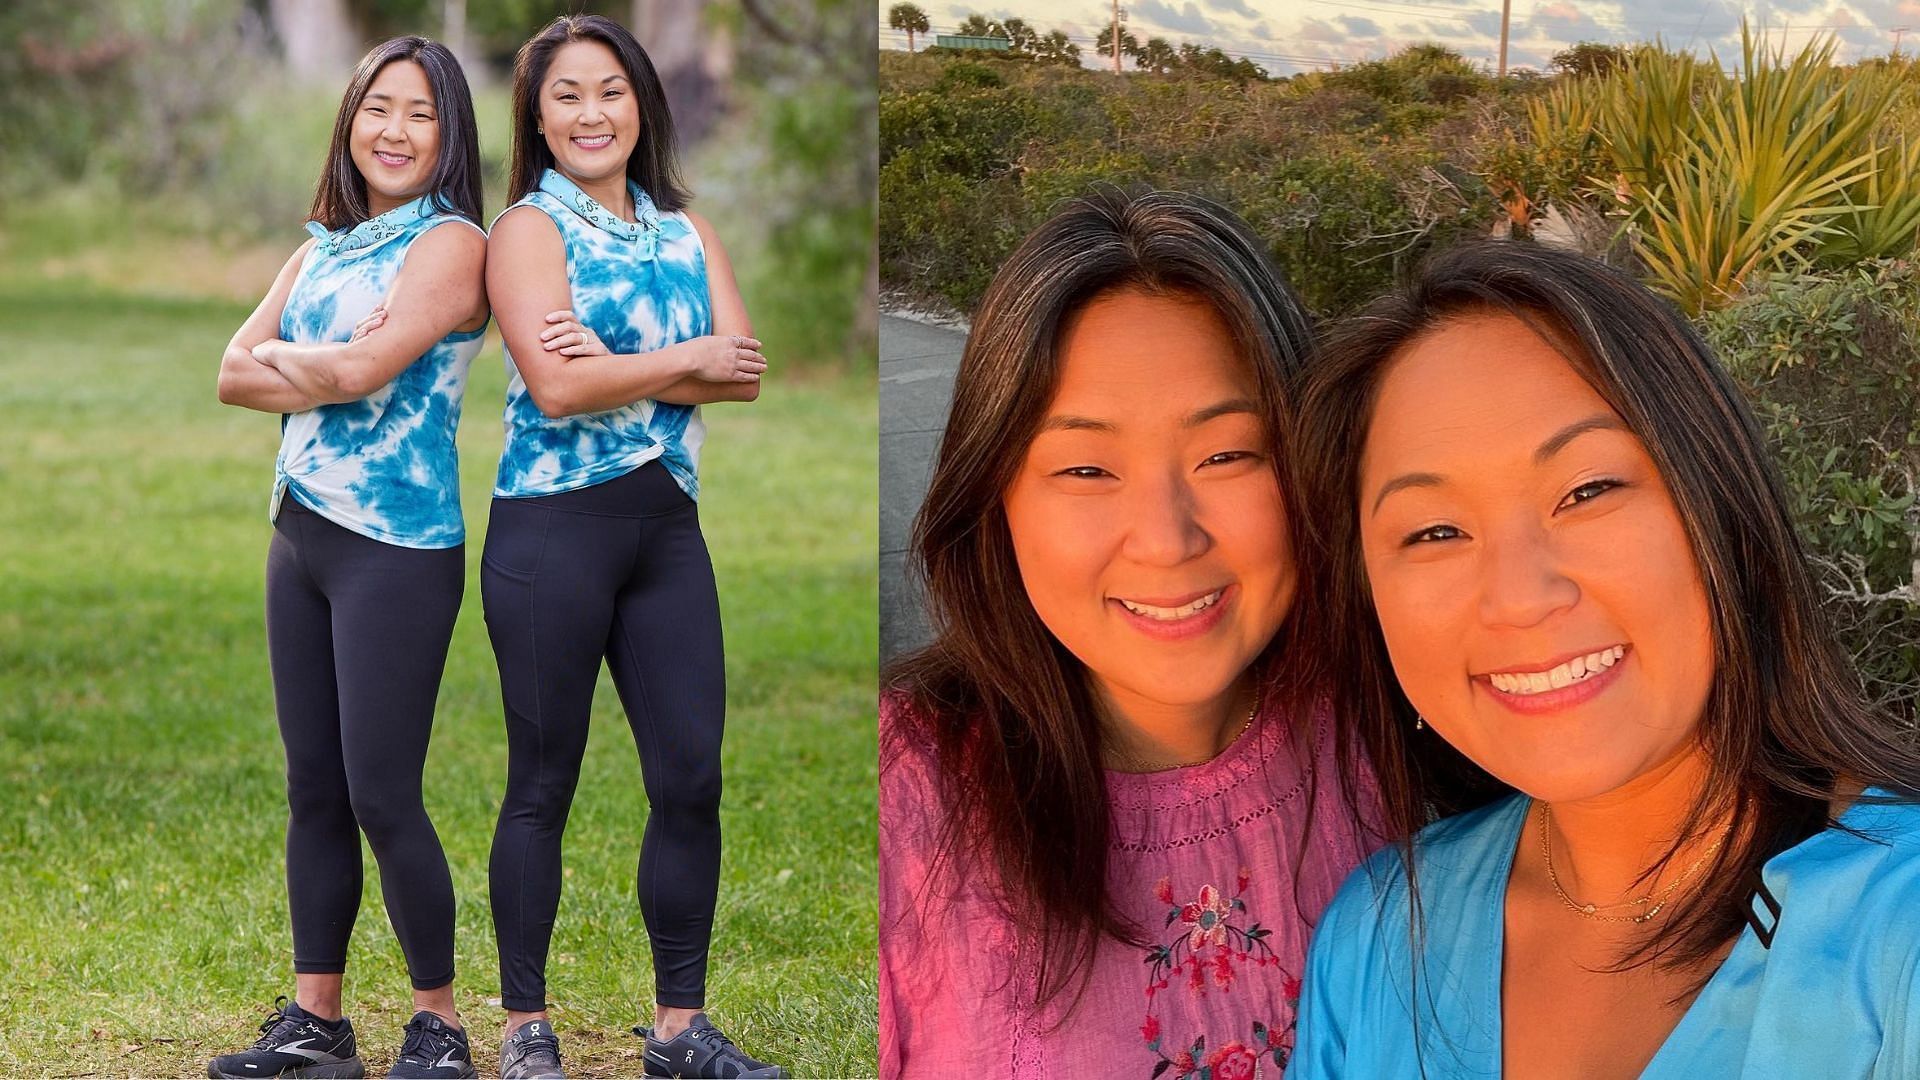 Emily and Molly, the long lost twins set to participate in The Amazing Race Season 34